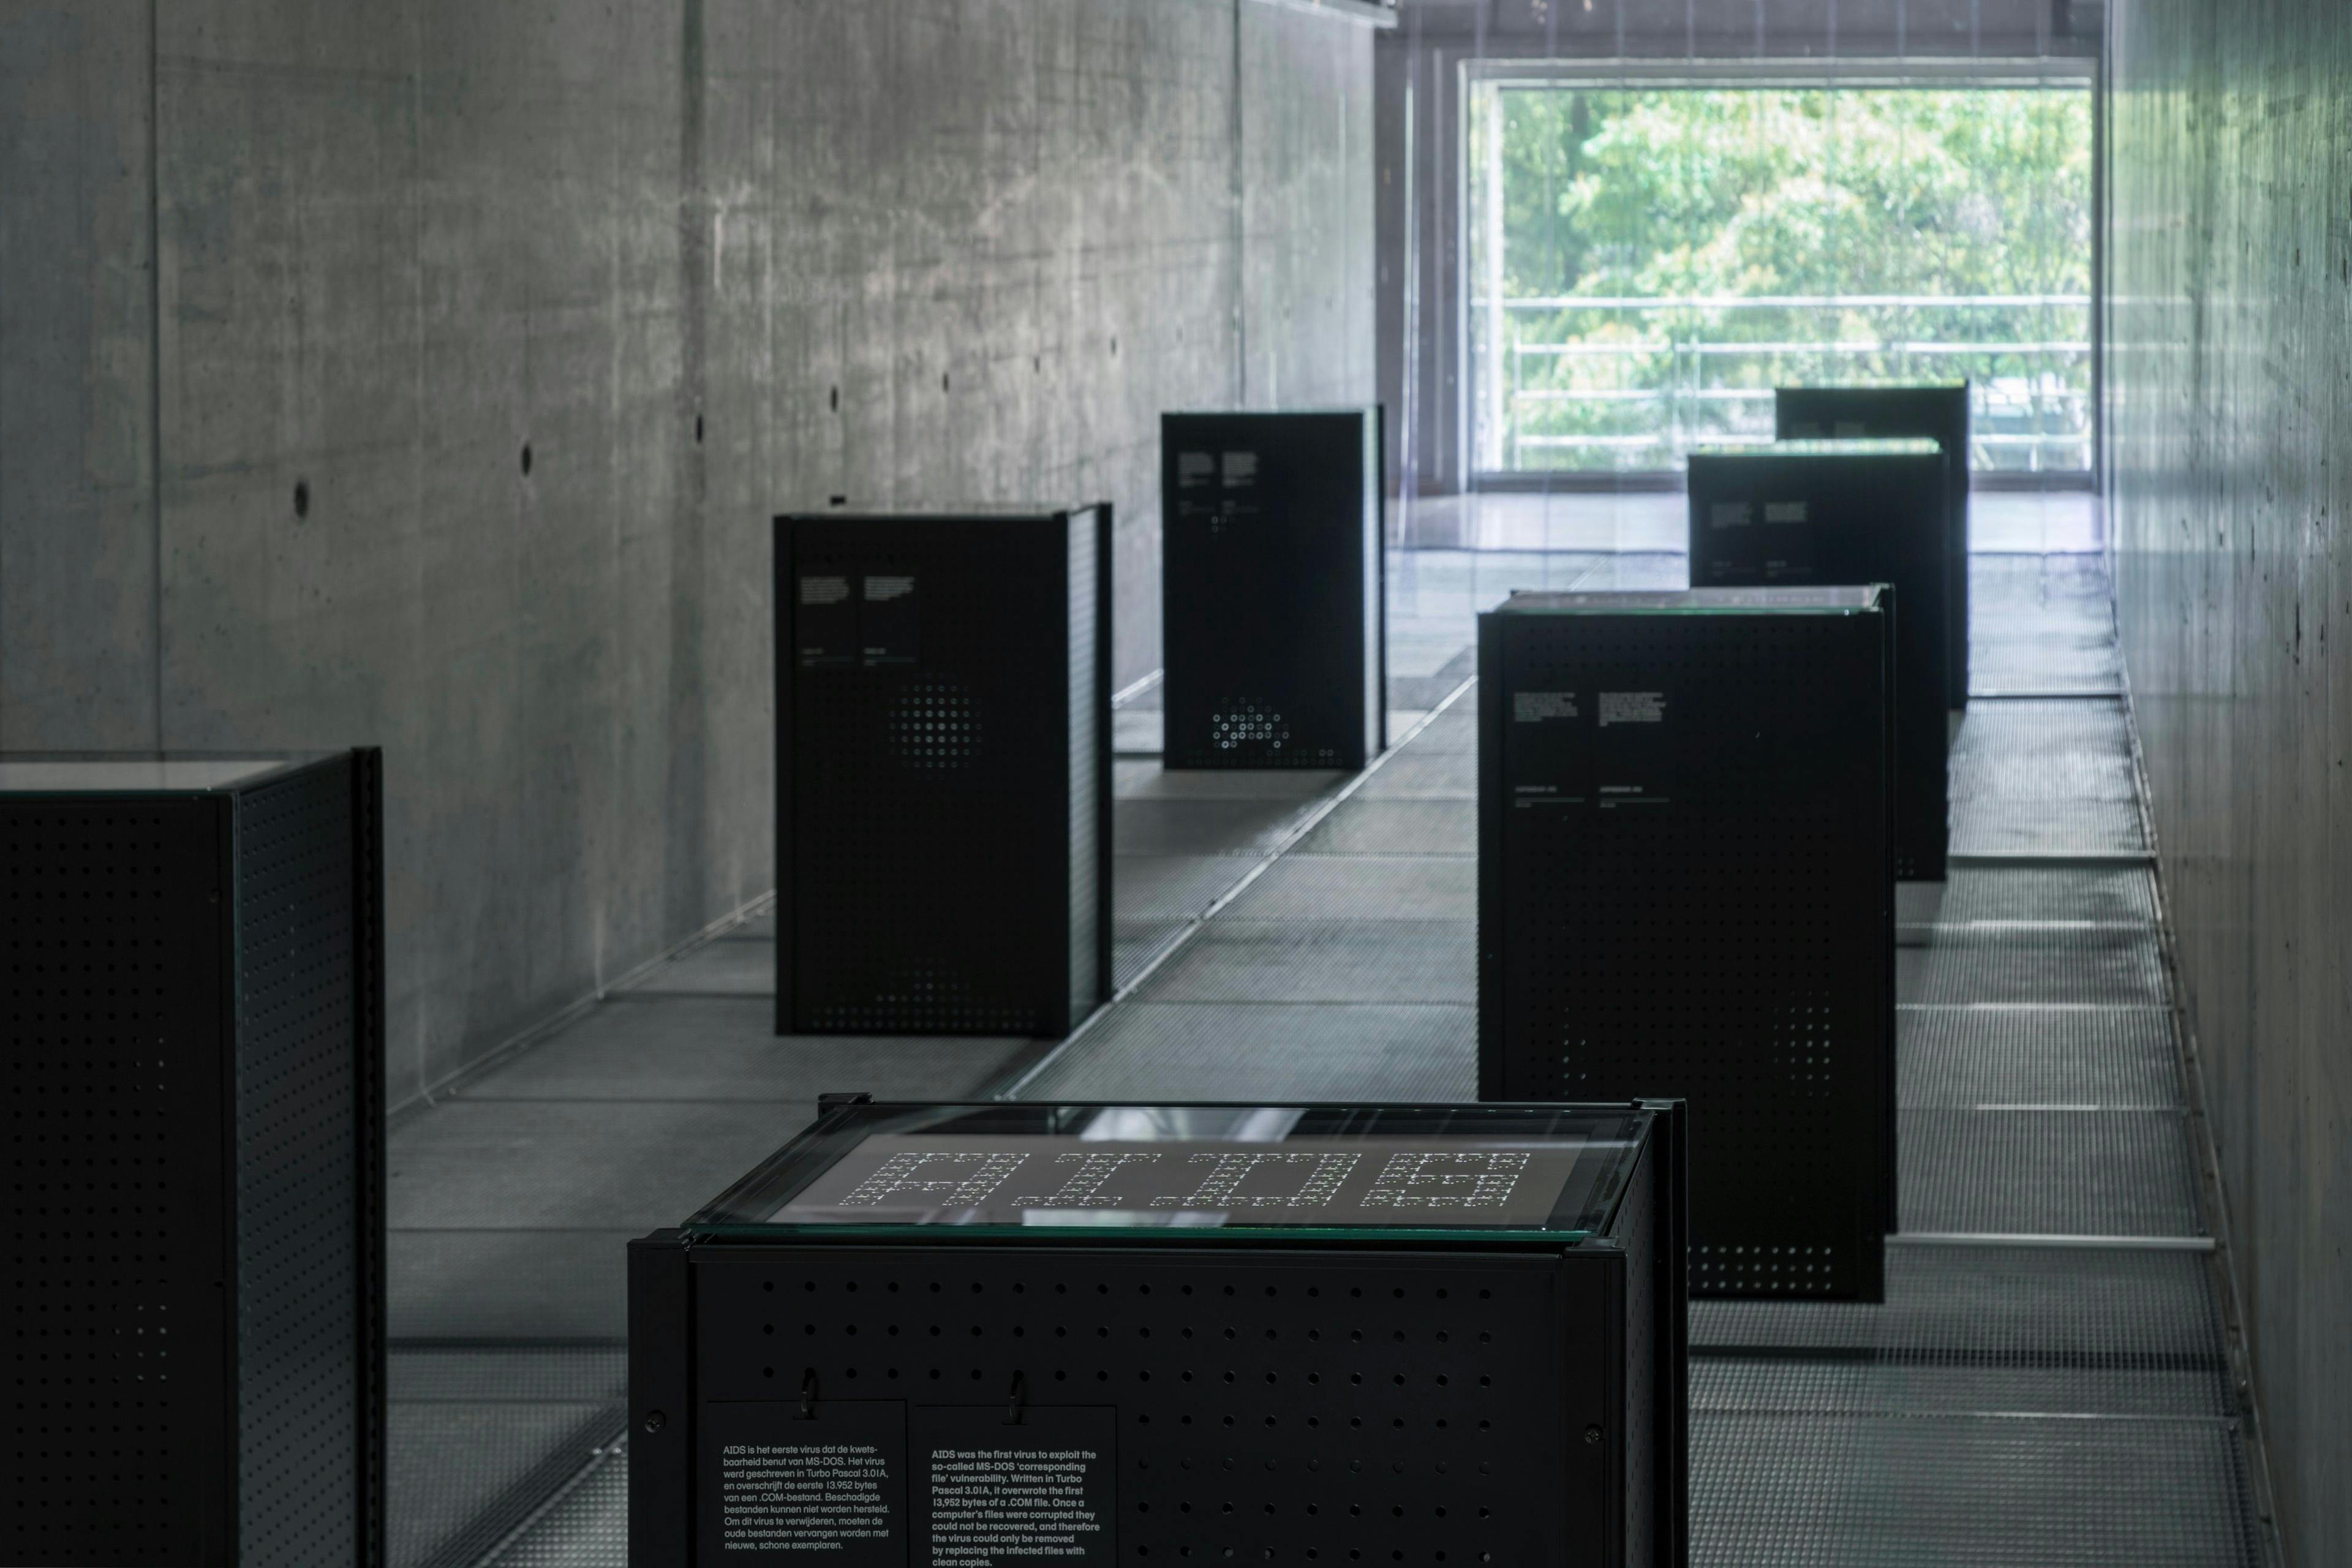 Malware exhibition, including AIDS virus and other DOS viruses. Image: Ewout Huibers 